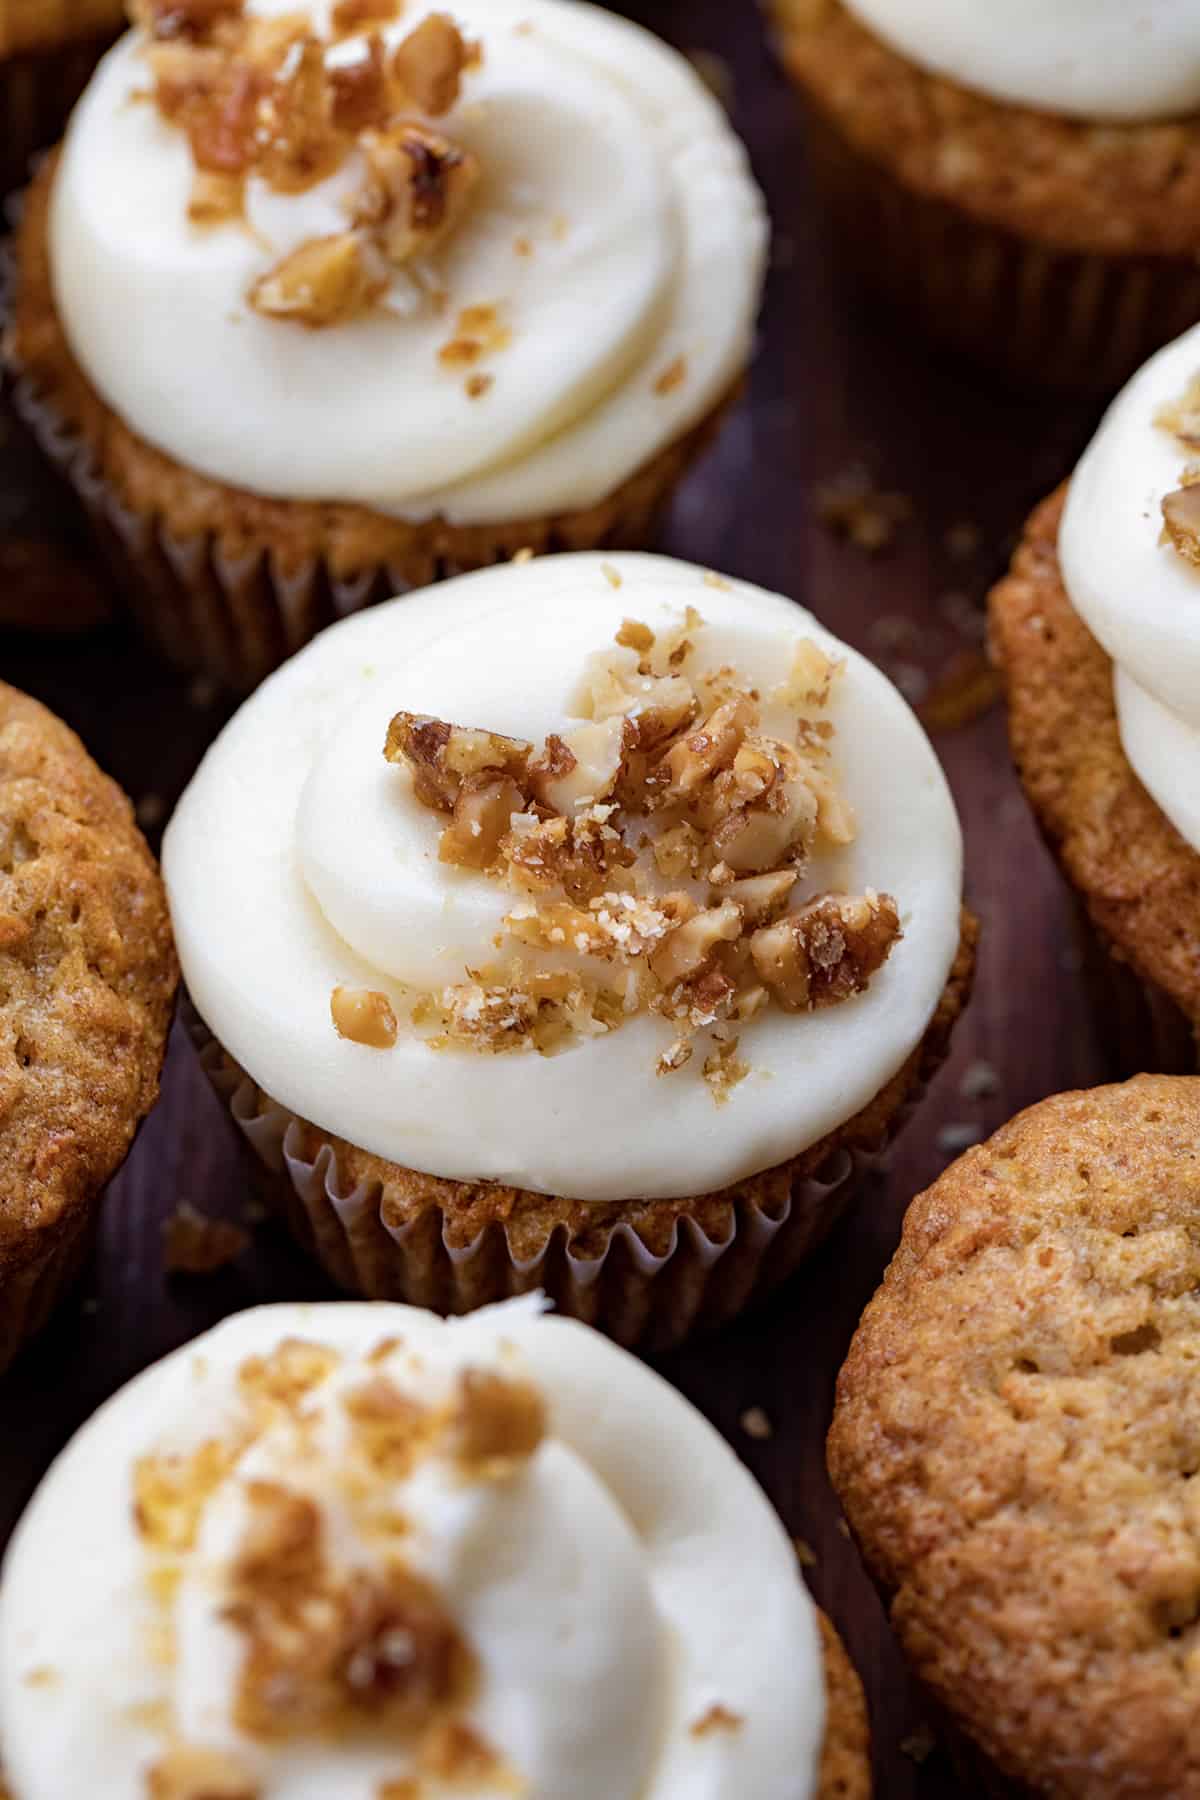 Close up of Carrot Cake Cupcake with Cream Cheese Frosting with Candied Walnuts.